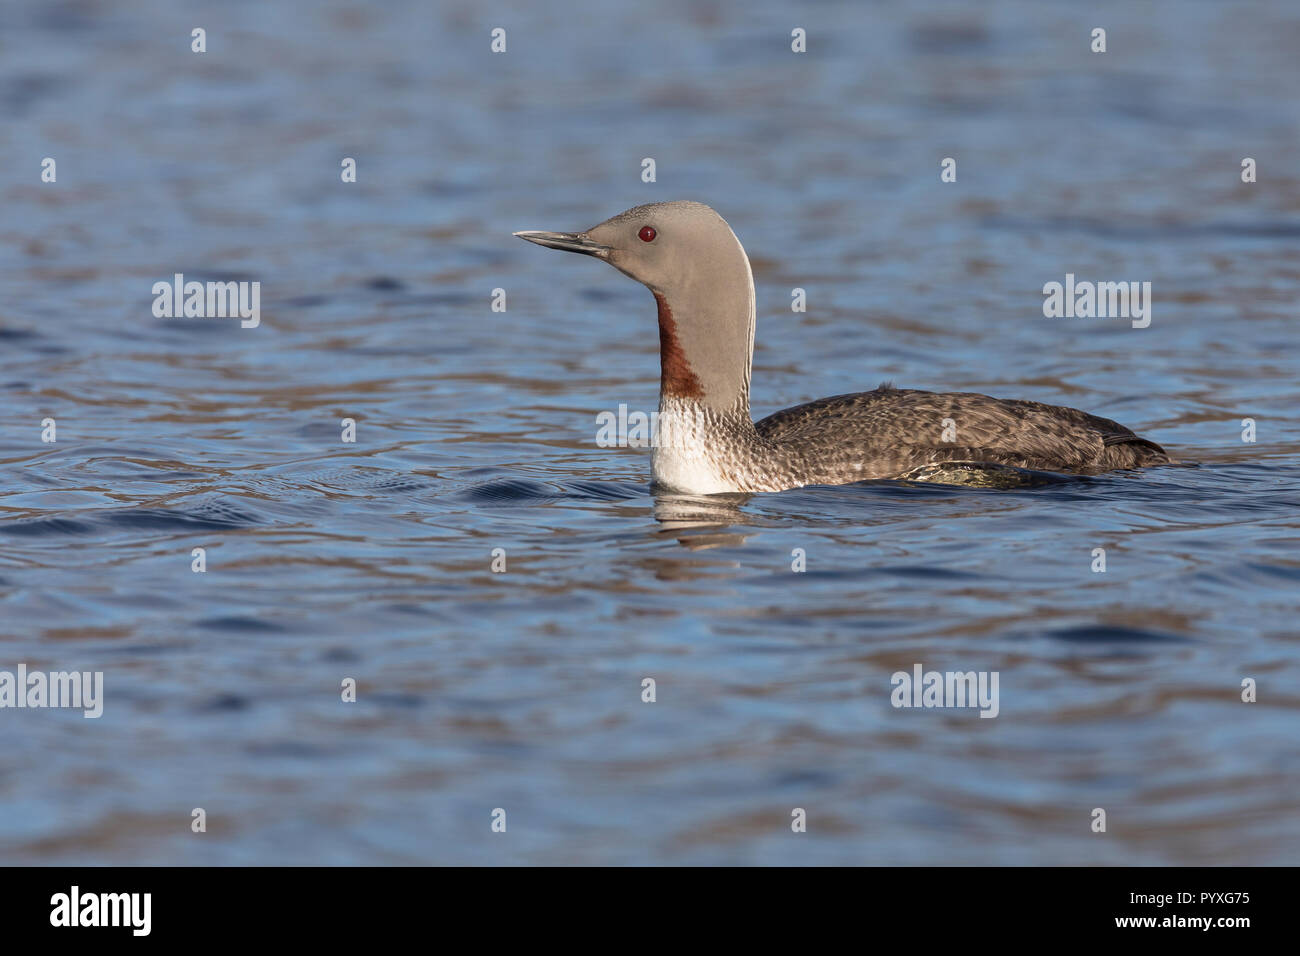 Sterntaucher, Stern-Taucher, Prachtkleid, Gavia stellata, rosso-throated diver, rosso-throated loon, Le Plongeon catmarin, le Plongeon à gorge rouge, le P Foto Stock